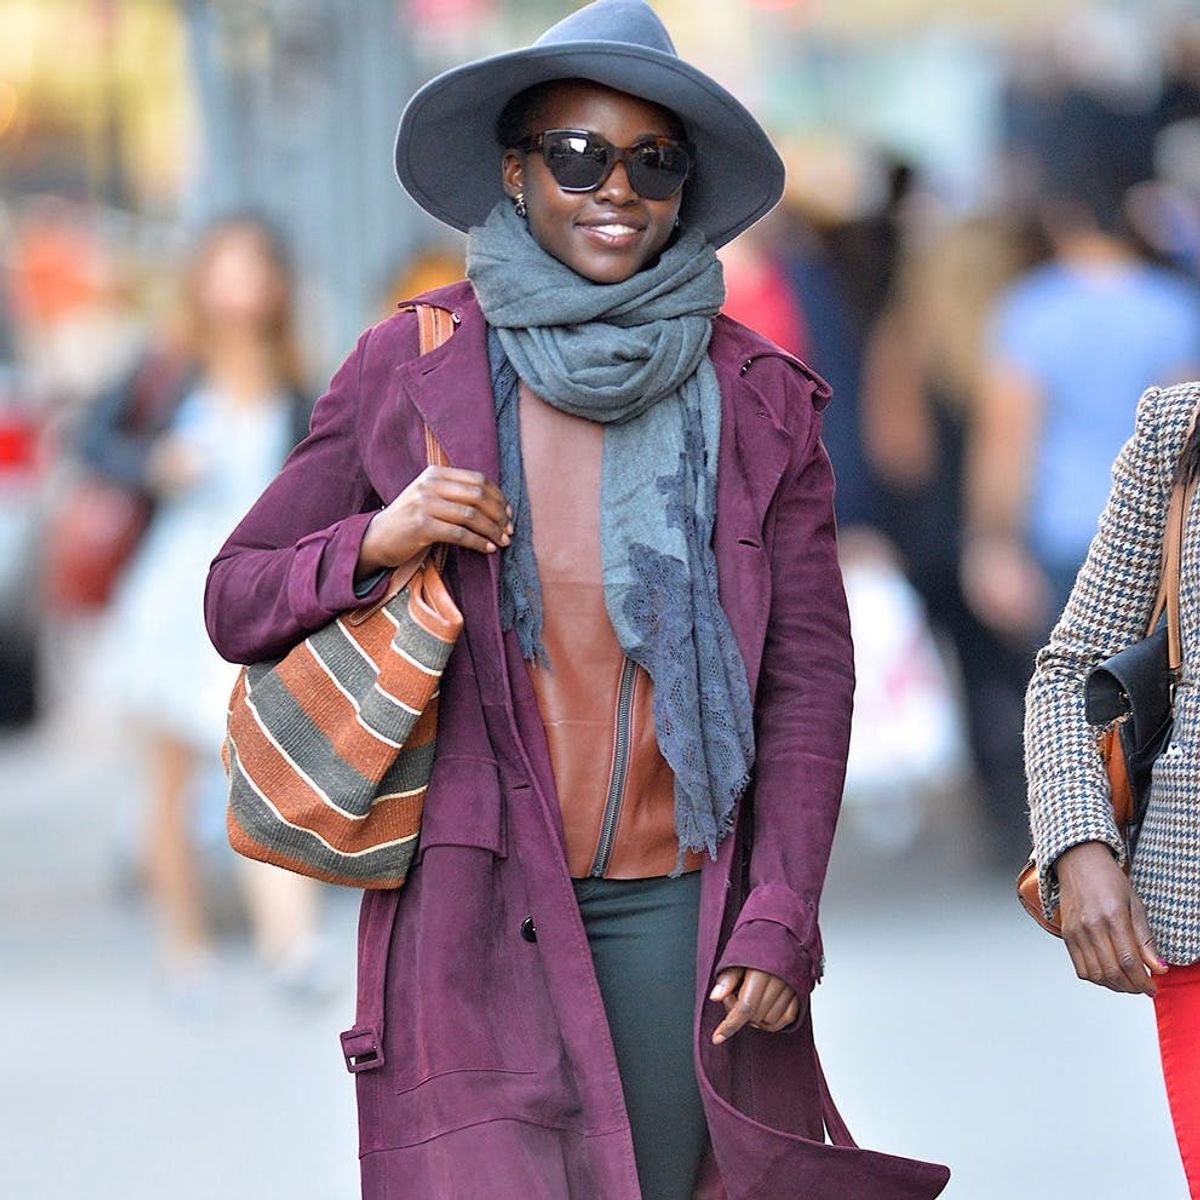 Lupita Nyong’o Just Showed Us the Most Stylish Trick for Layering in Cold Weather